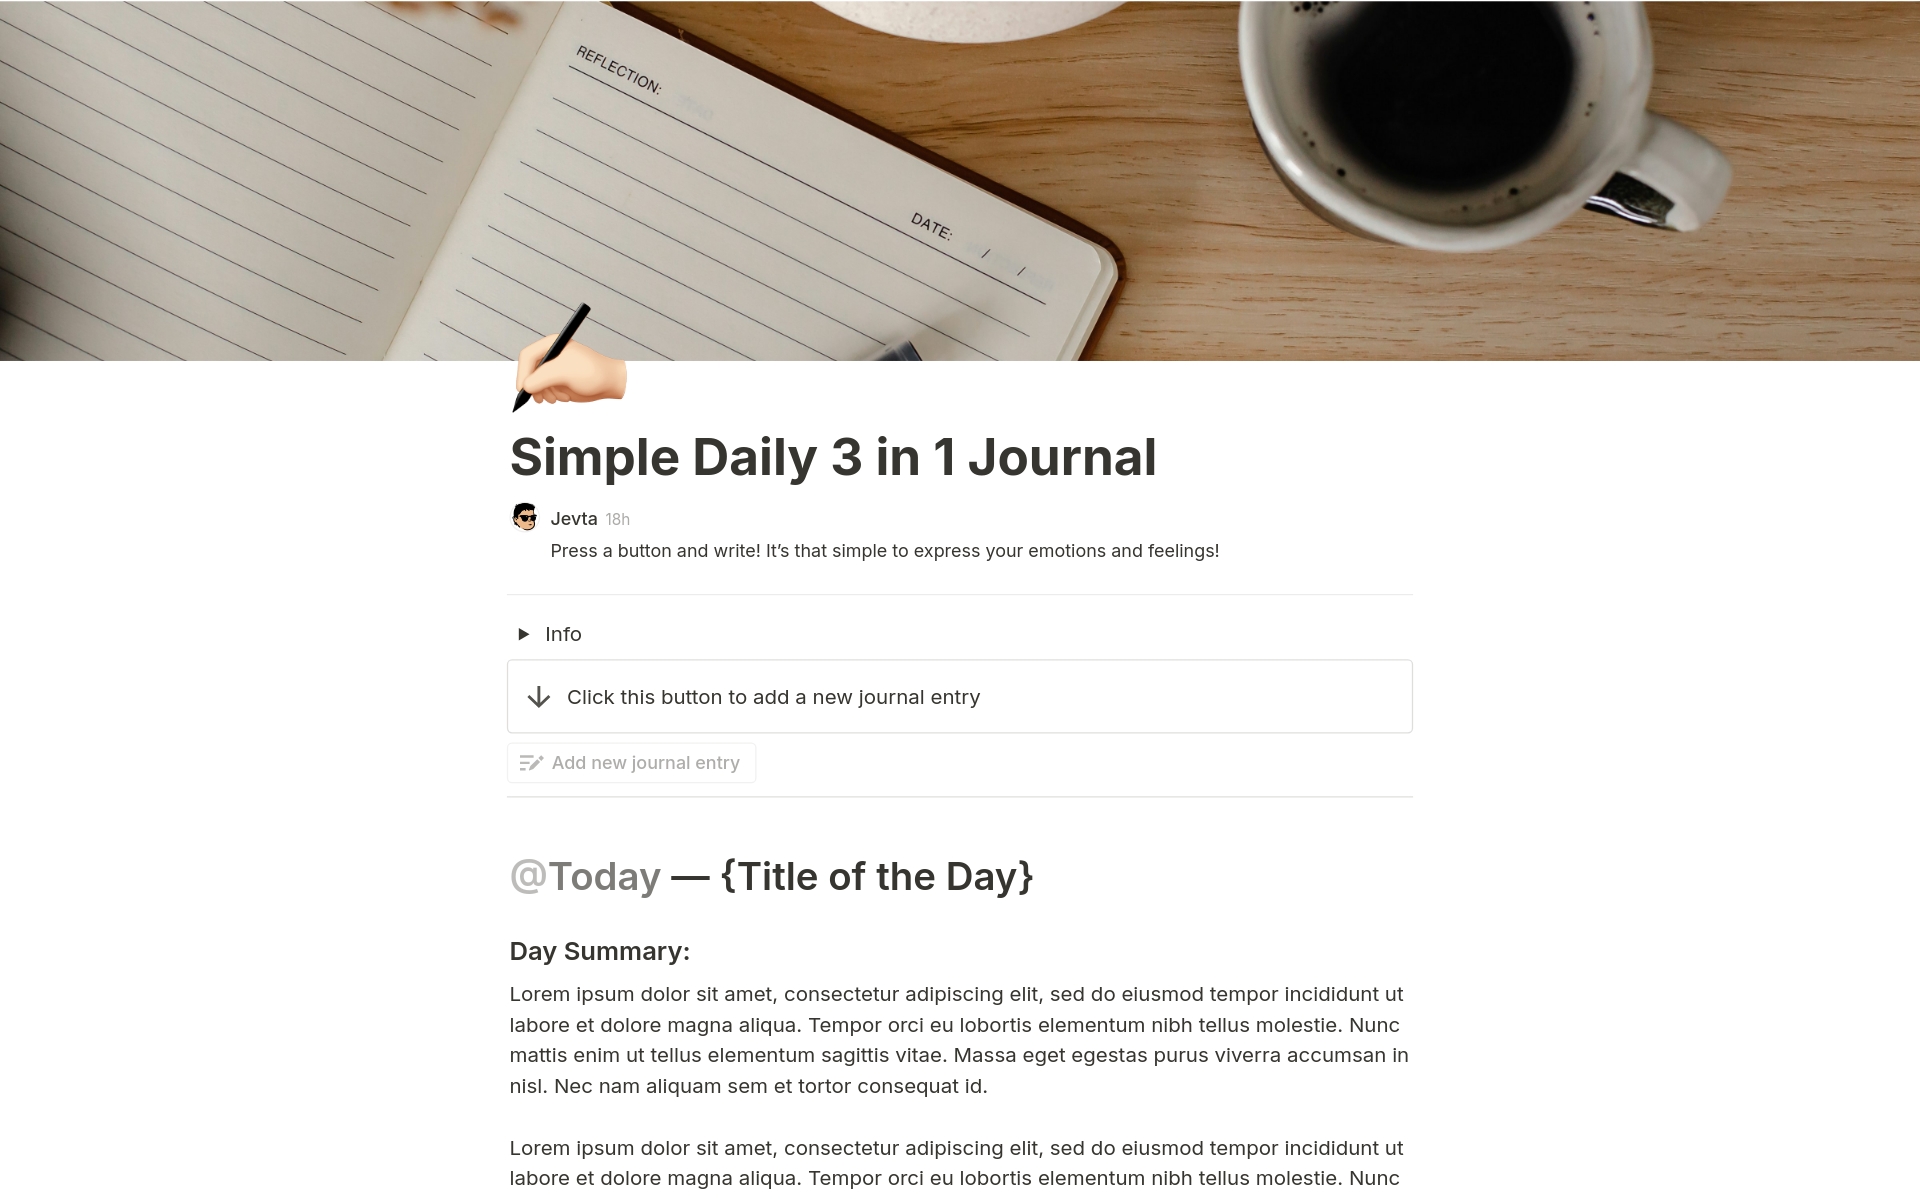 Presenting the Simple Daily 3 in 1 Journal: reflection, gratitude, and introspection. 